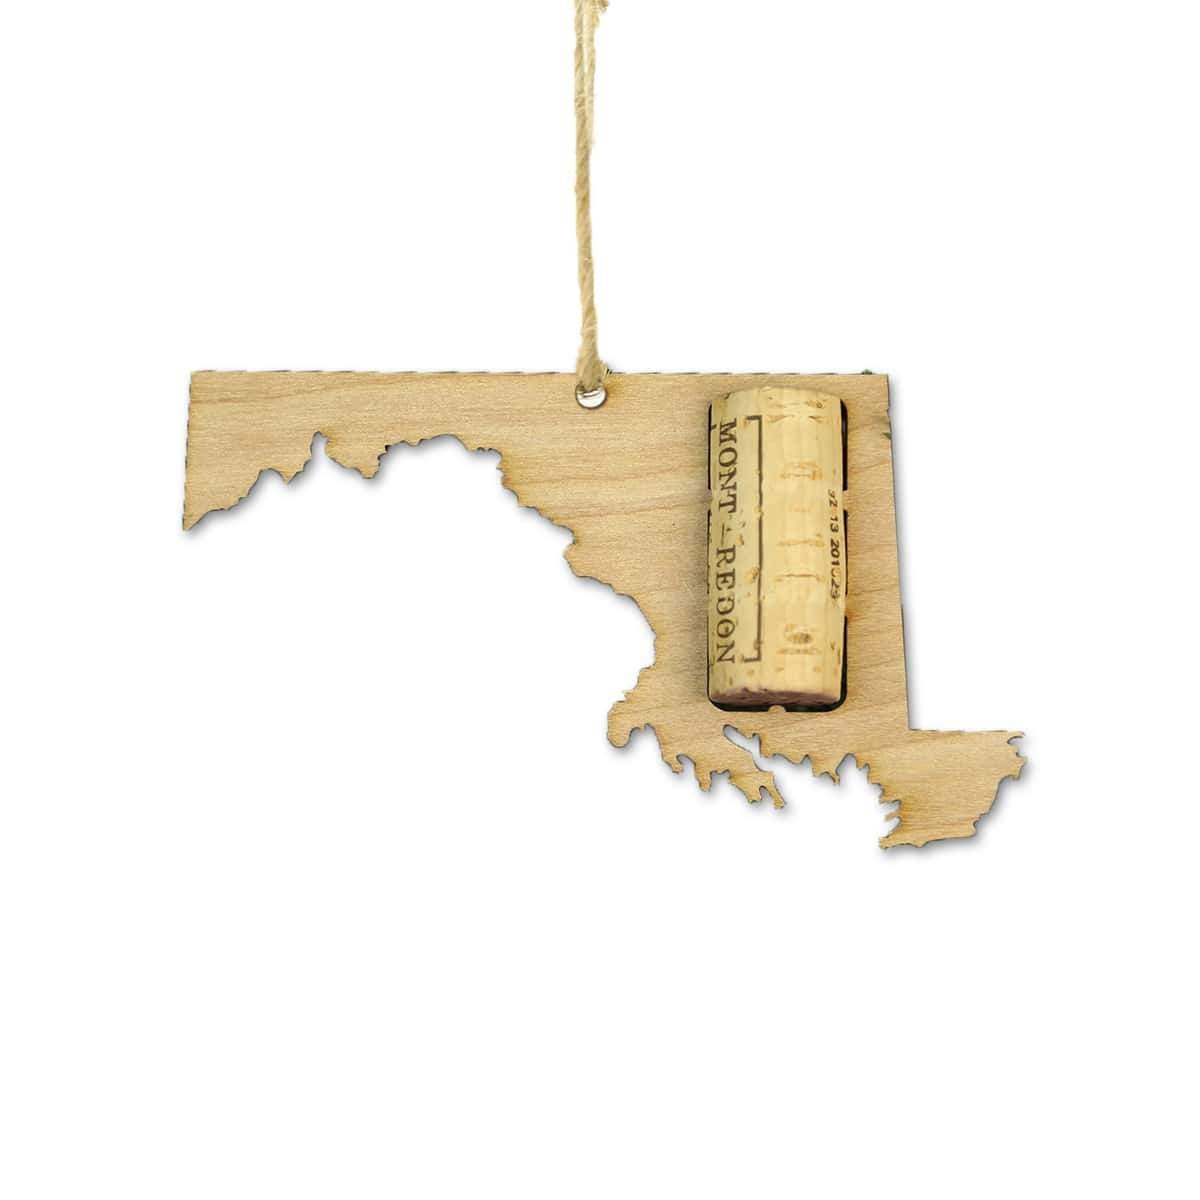 Torched Products Wine Cork Holder Maryland Wine Cork Holder Ornaments (781200326773)